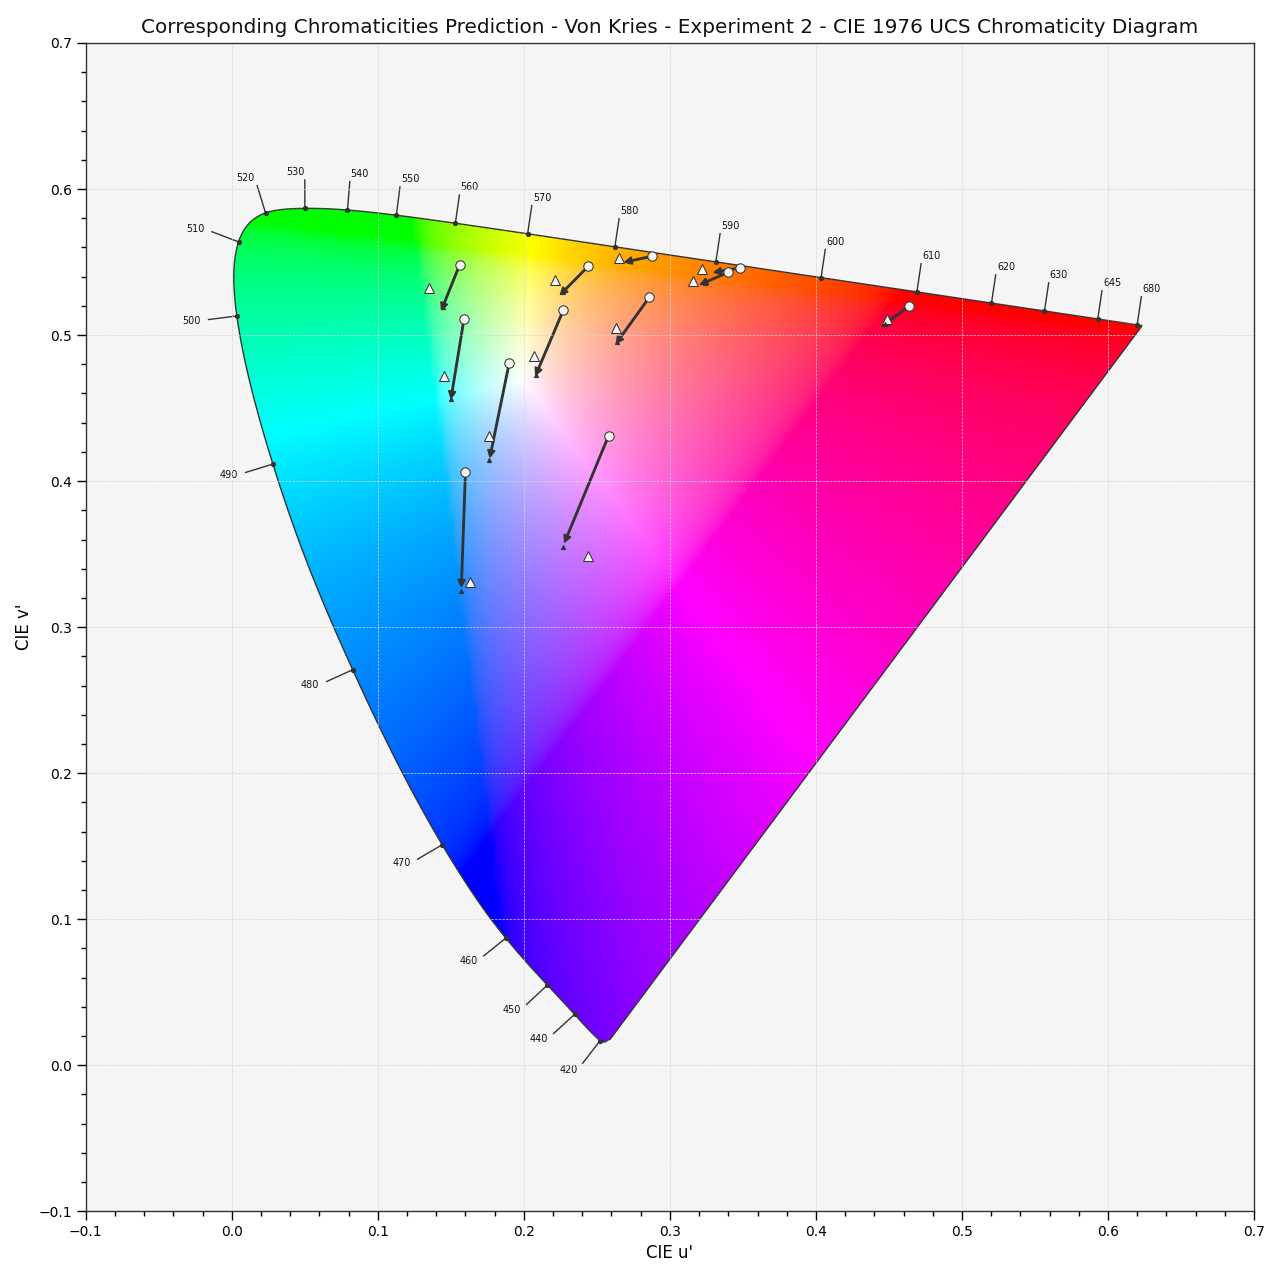 https://colour.readthedocs.io/en/develop/_static/Examples_Plotting_Chromaticities_Prediction.png